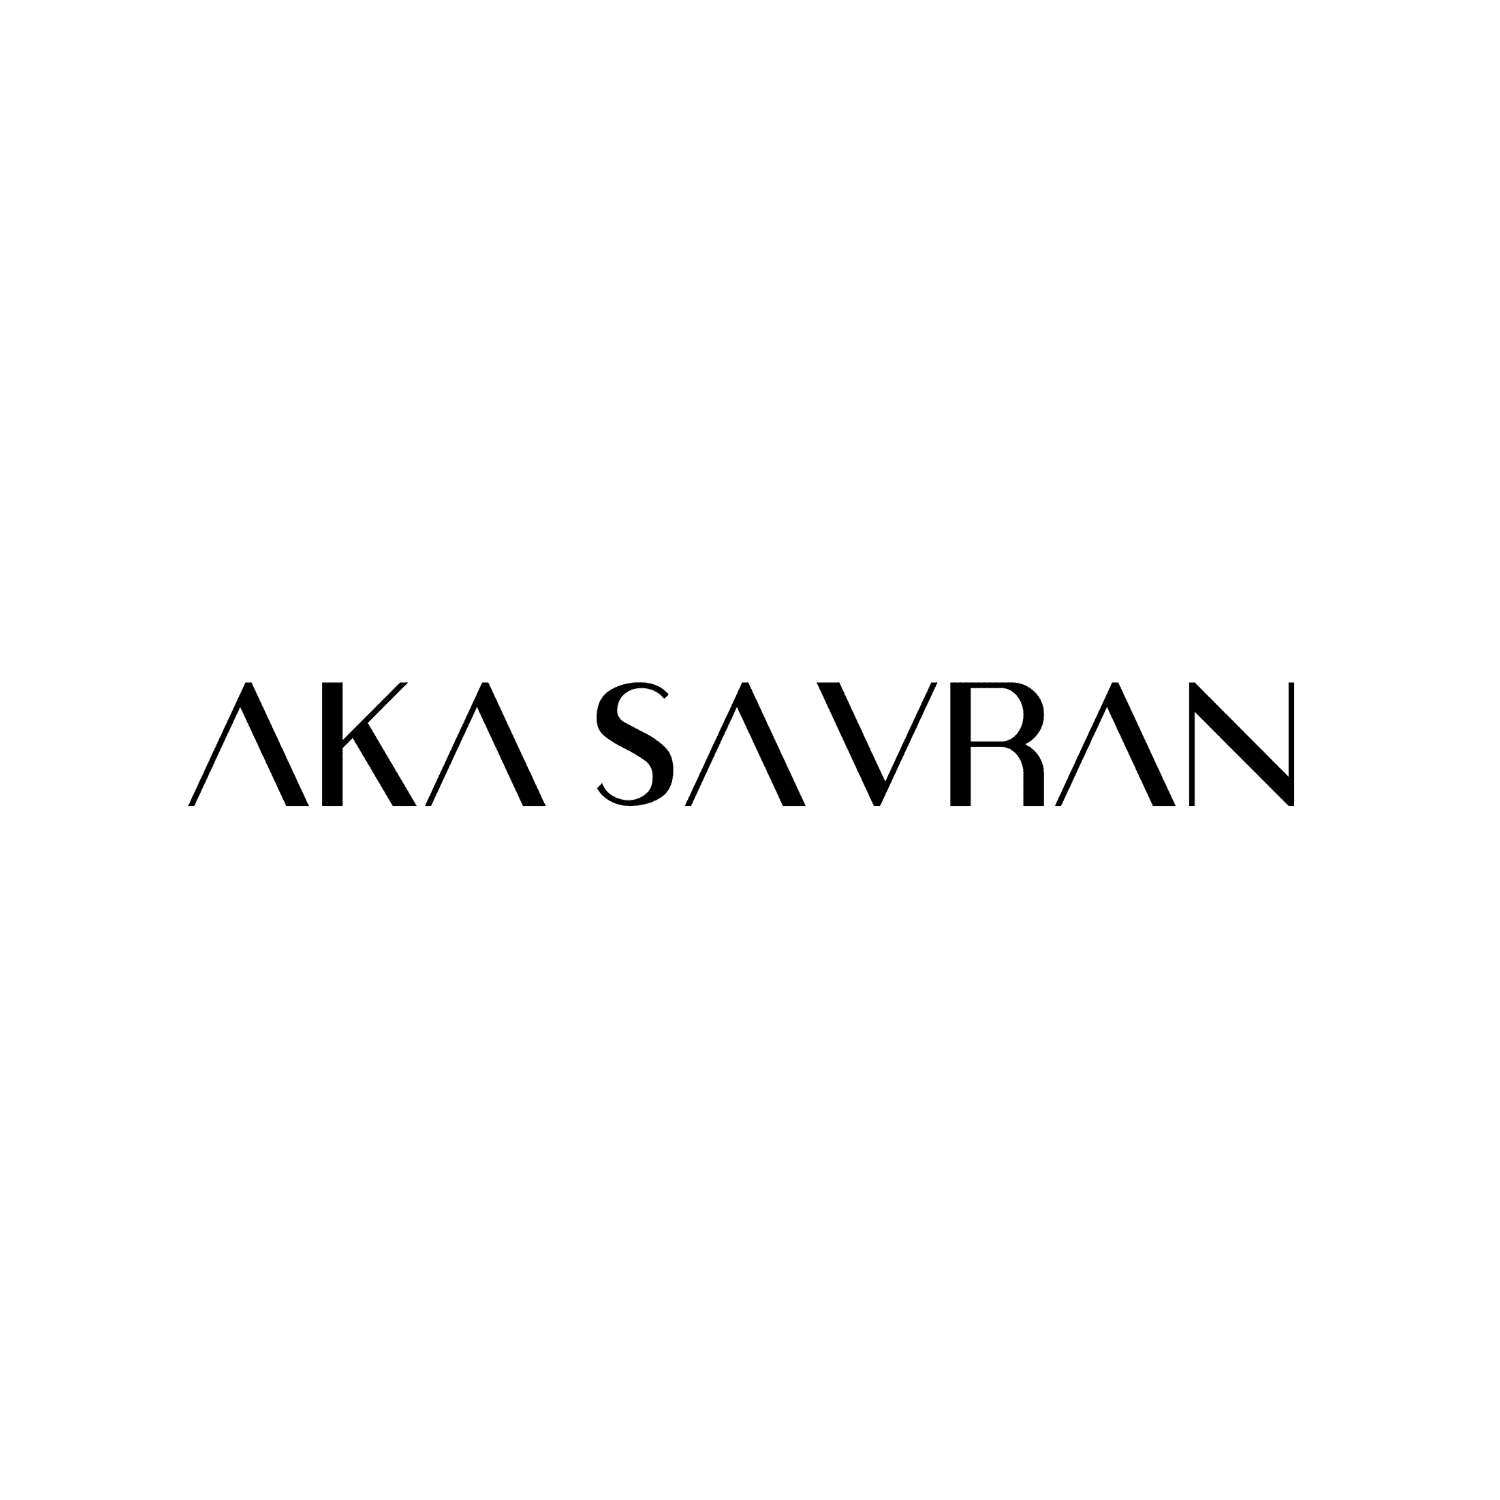 An elegant and classic image of the logo of AKA SAVRAN in black and white